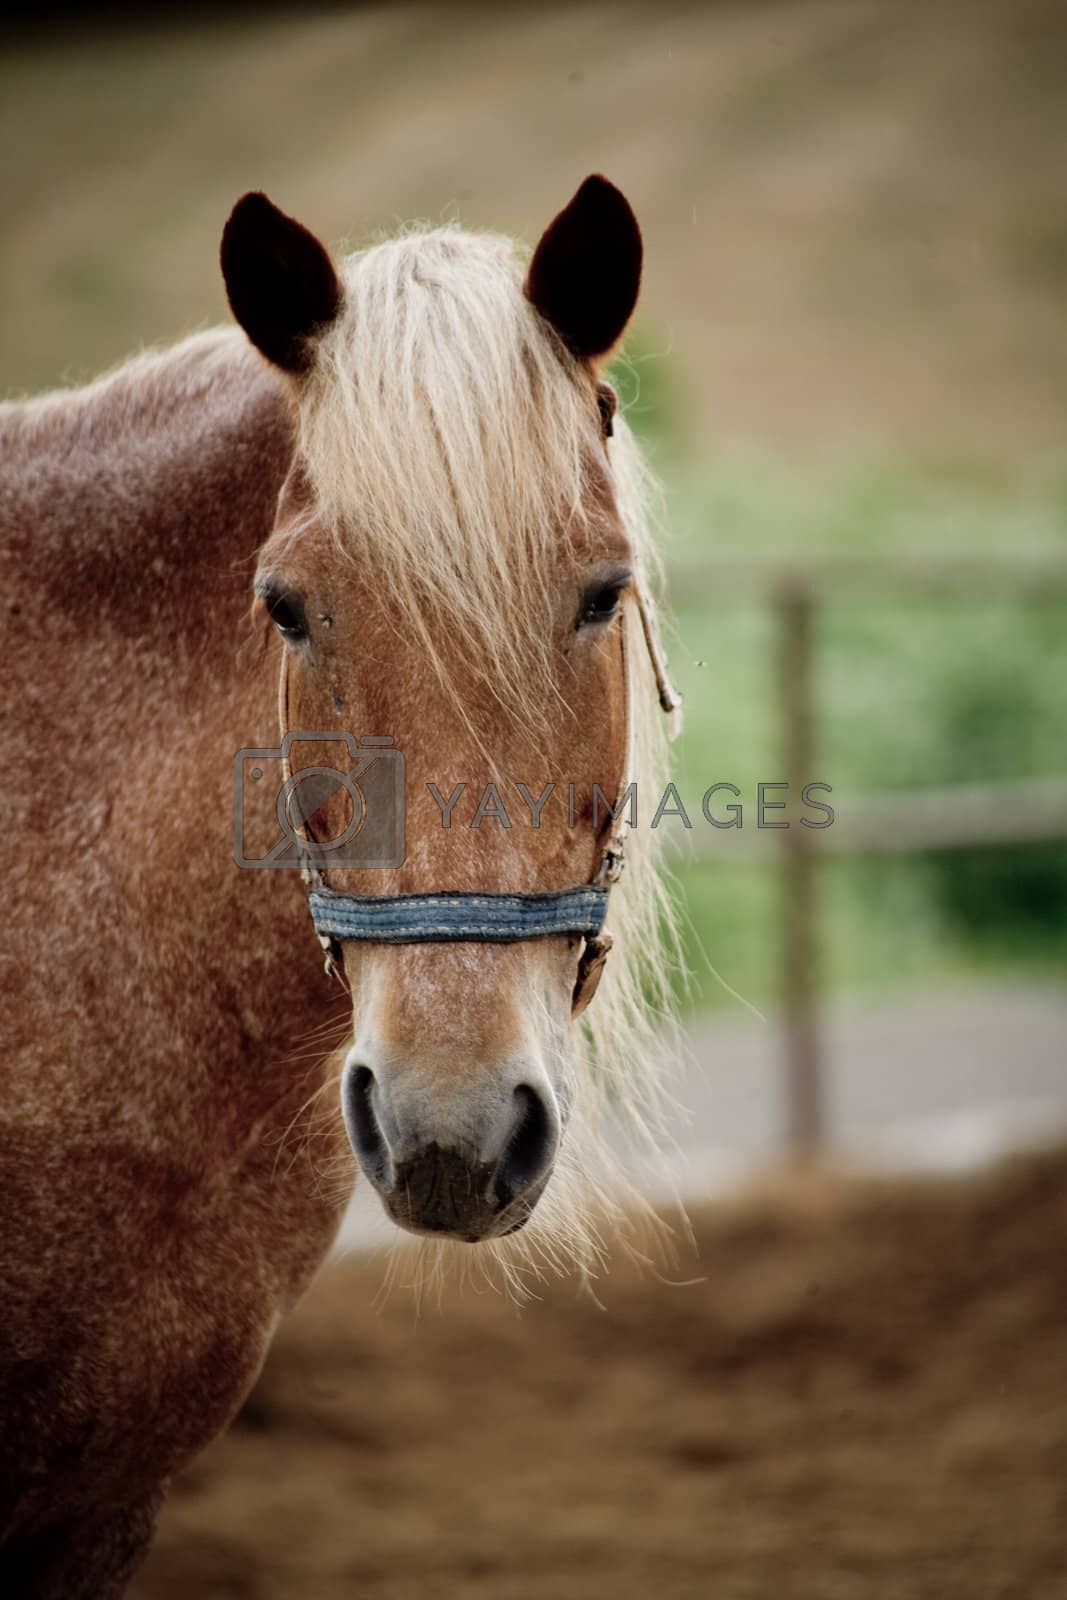 Royalty free image of Horse by alenkasm